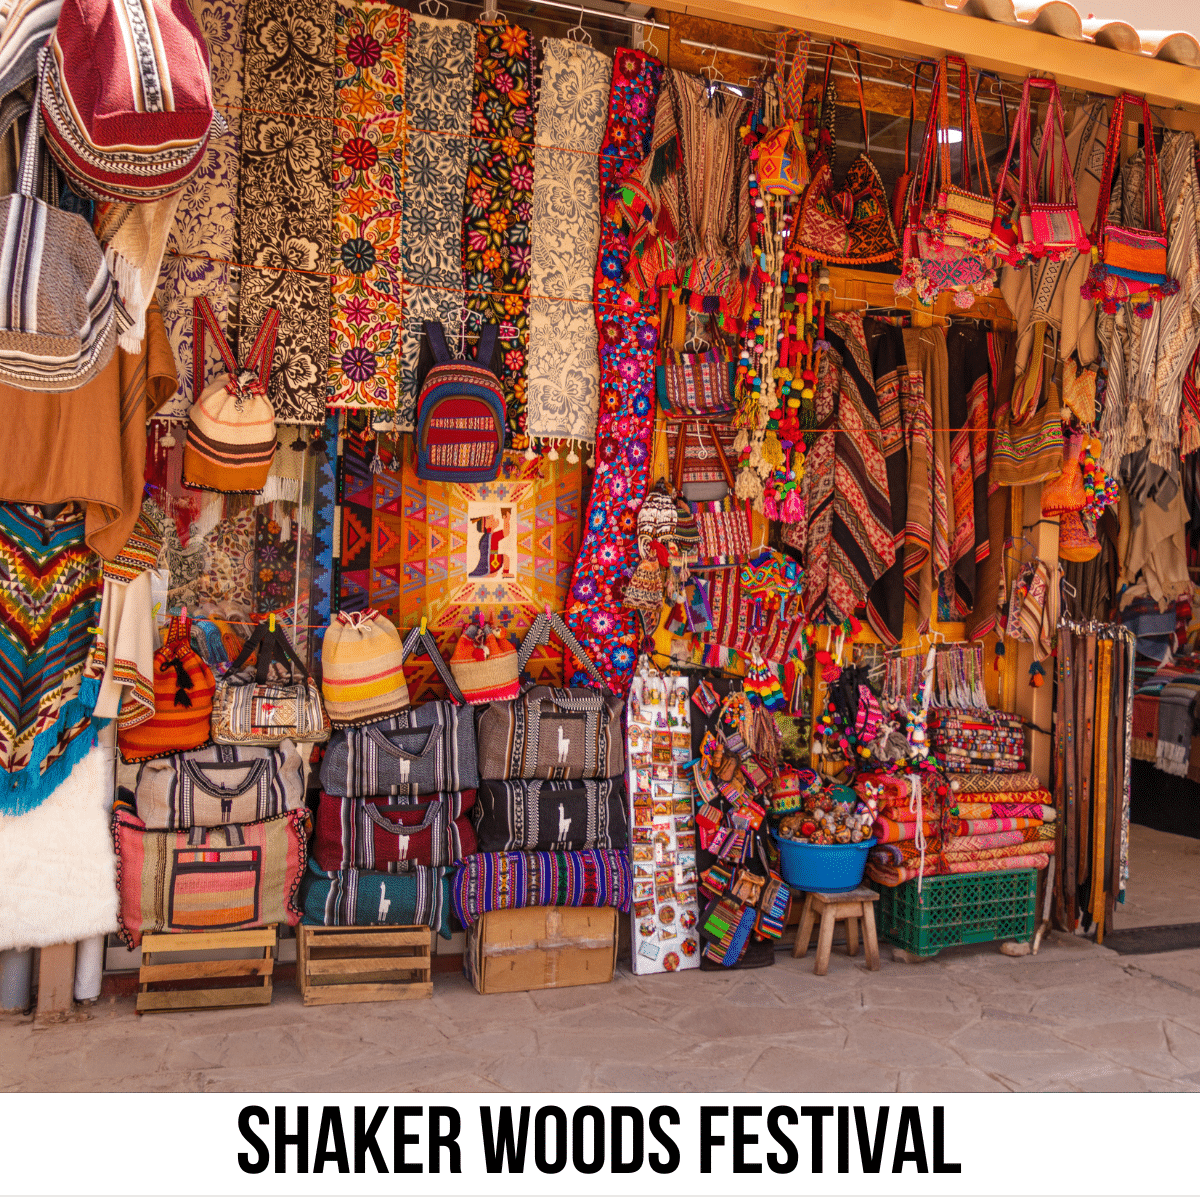 A square image of a photo of a wall in an outdoor market, filled with colorful bags and scarves. A white strip across the bottom has text Shaker Woods Festival.